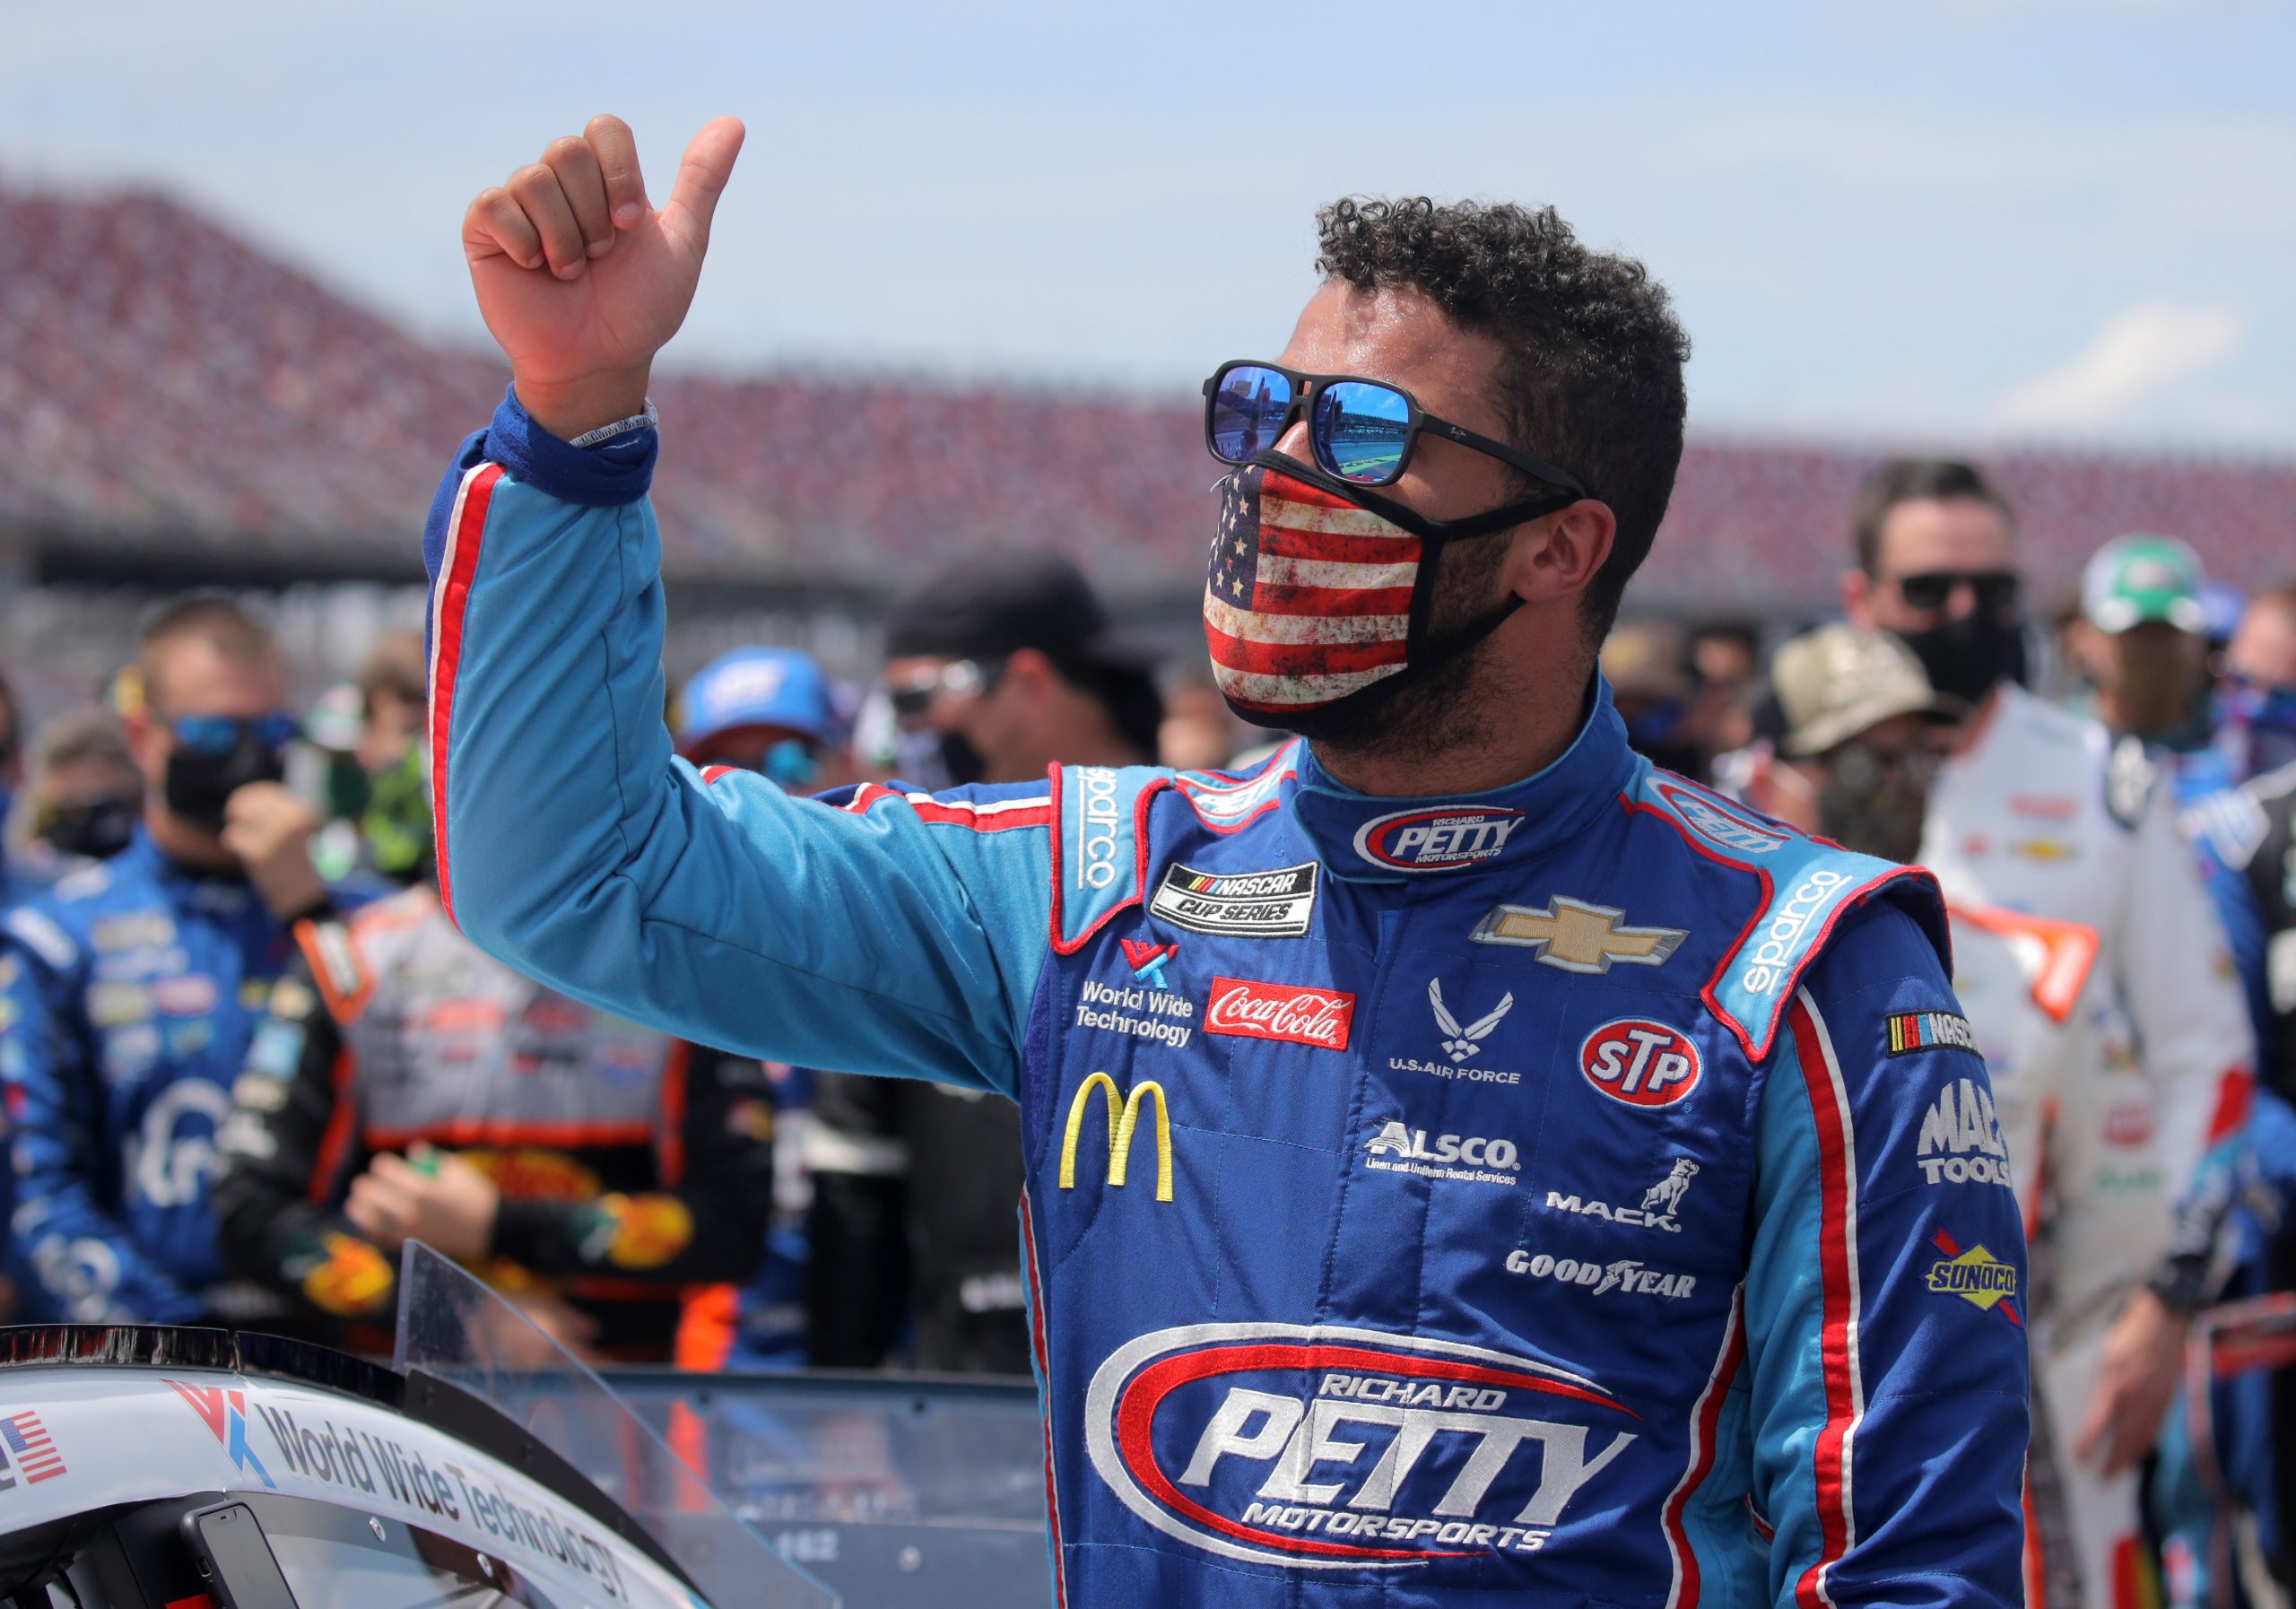 TALLADEGA, ALABAMA - JUNE 22: Bubba Wallace, driver of the #43 Victory Junction Chevrolet, gives a thumbs up prior to the NASCAR Cup Series GEICO 500 at Talladega Superspeedway on June 22, 2020 in Talladega, Alabama. A noose was found in the garage stall of NASCAR driver Bubba Wallace at Talladega Superspeedway a week after the organization banned the Confederate flag at its facilities.